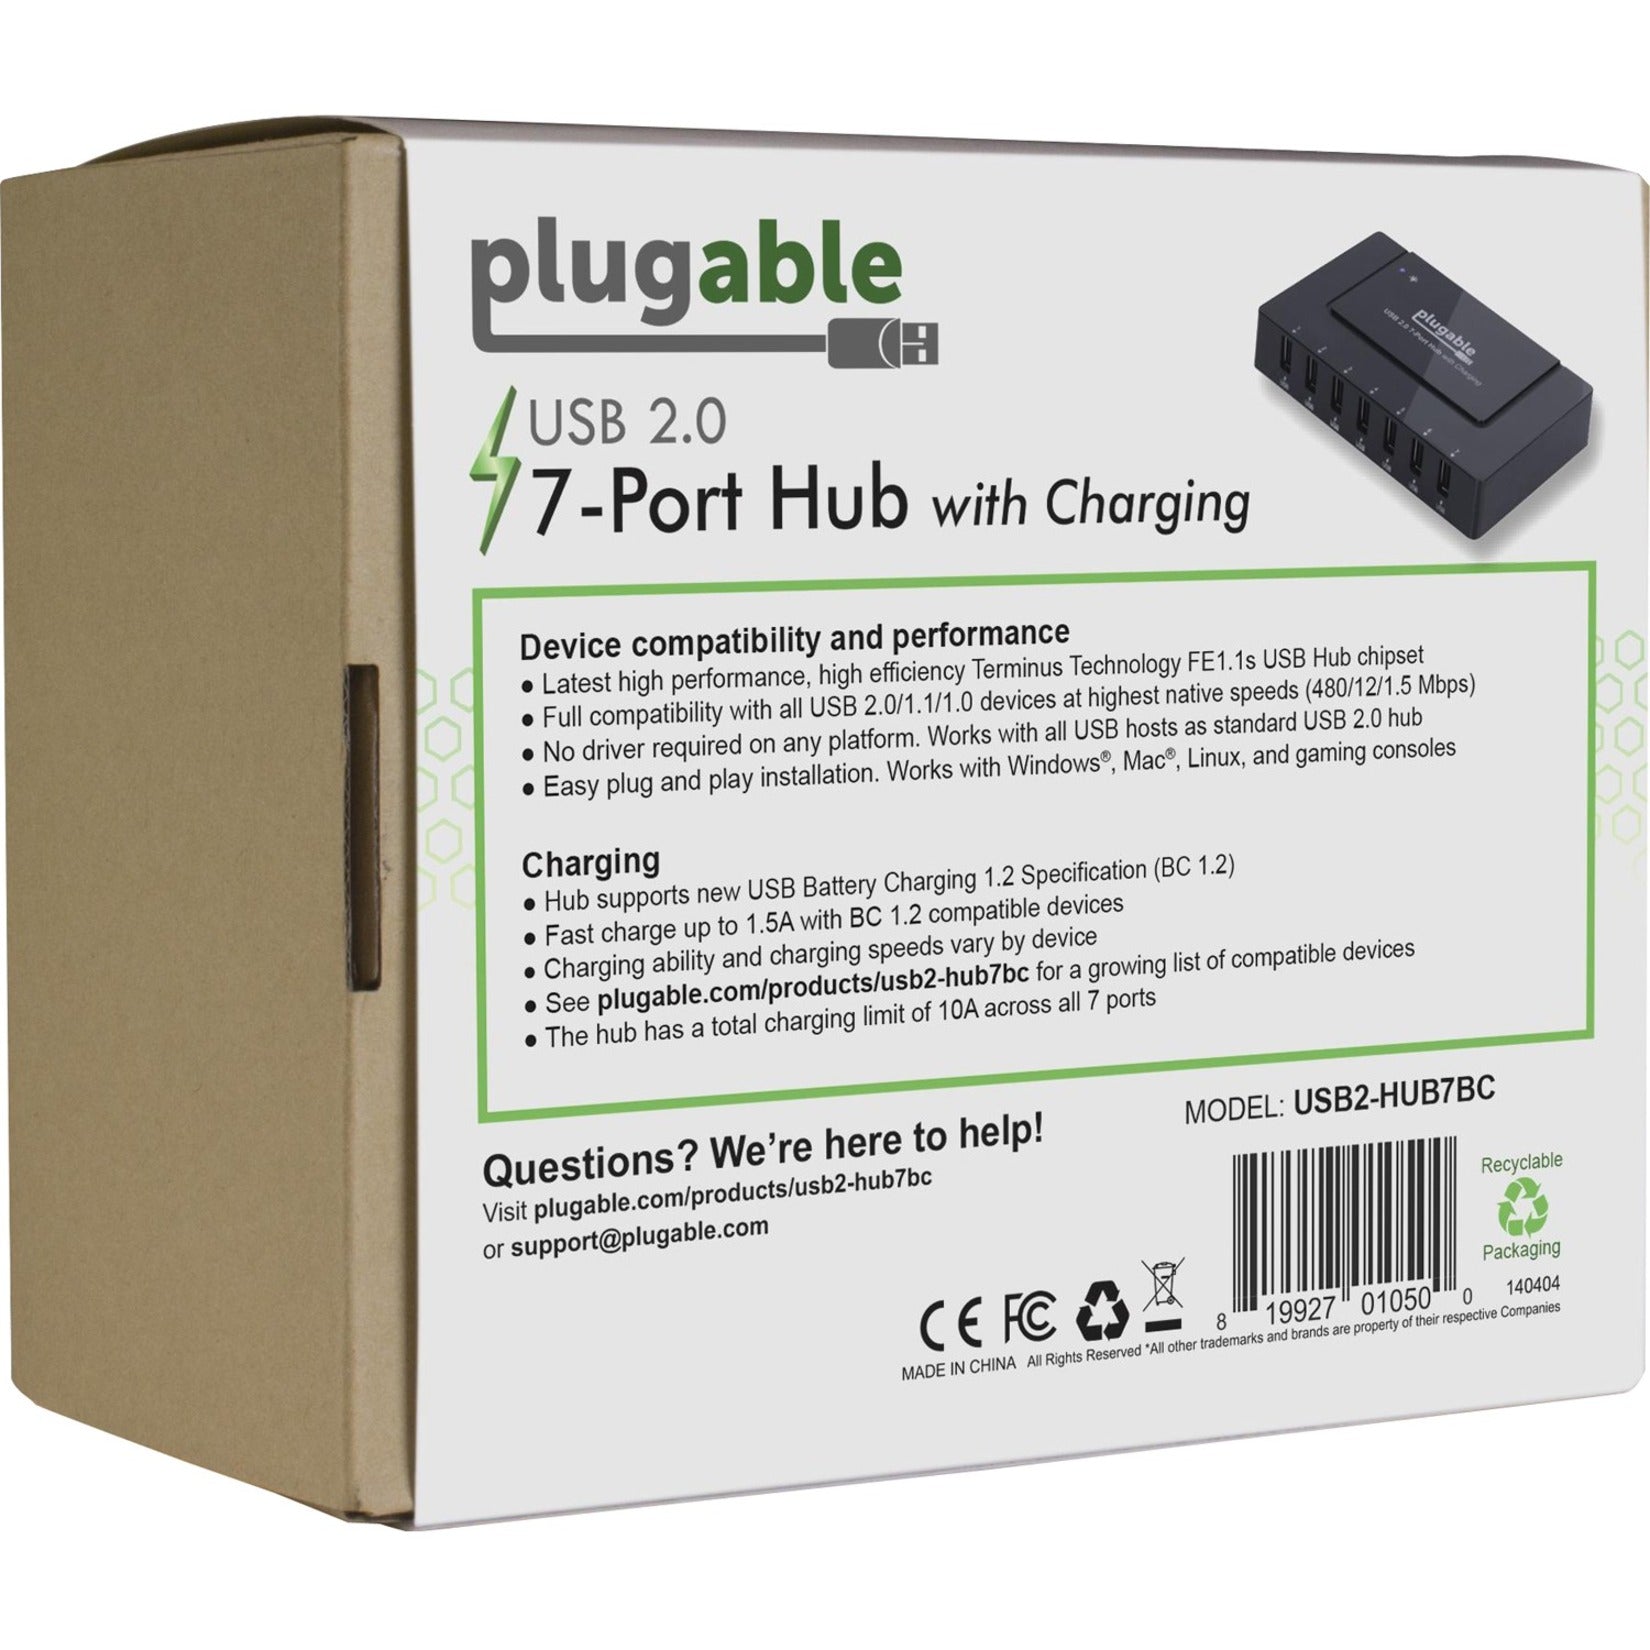 Plugable USB2-HUB7BC USB 2.0 7-Port High Speed Charging Hub, Fast Charging for Multiple Devices [Discontinued]